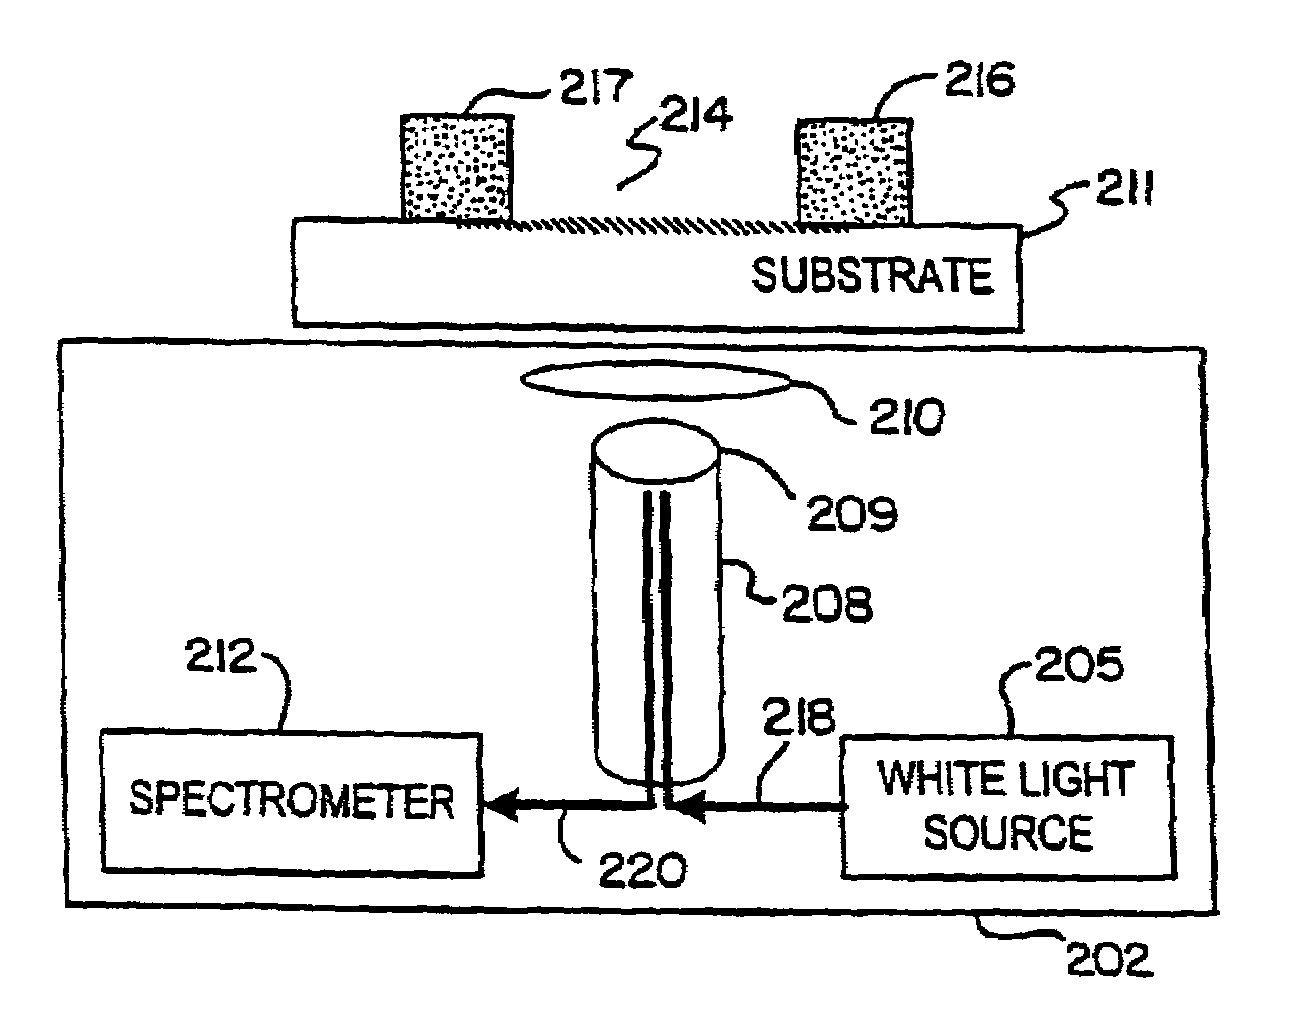 Method and apparatus for detecting biomolecular interactions